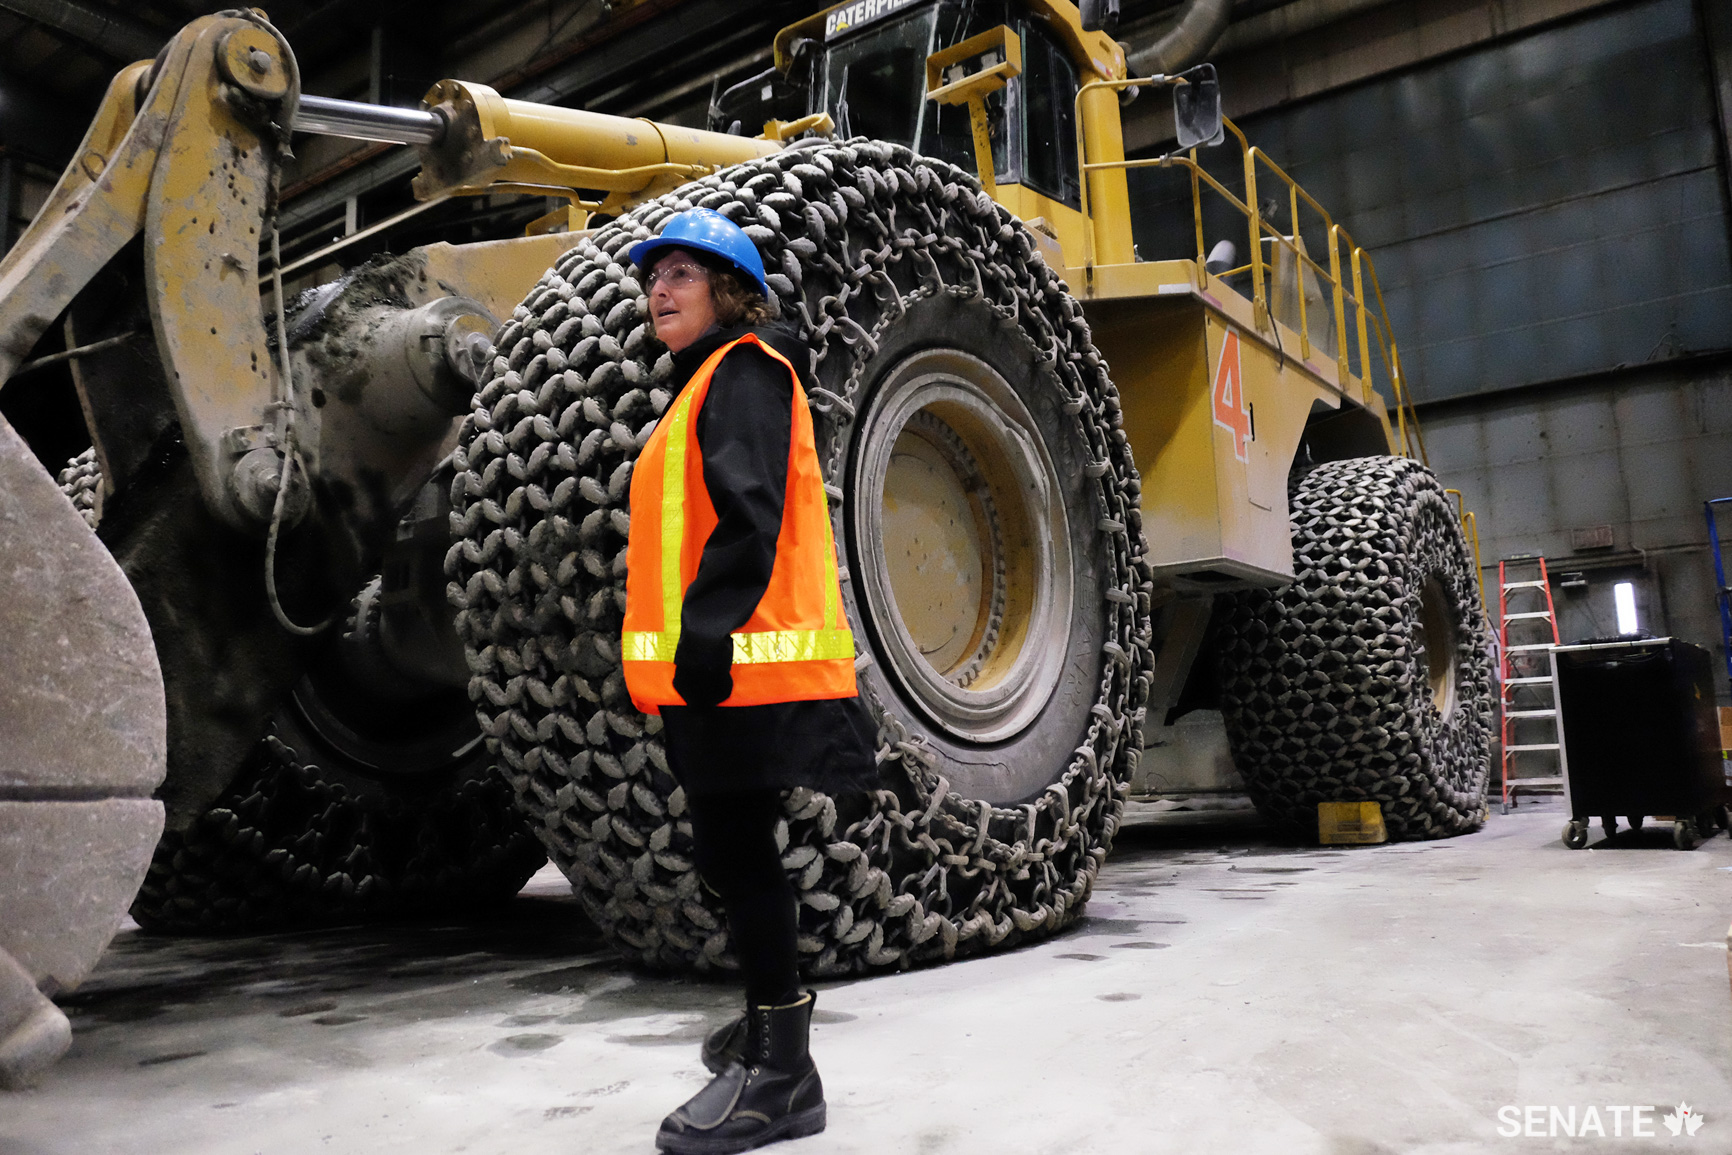 Senator Mary Coyle examines the garage at Meadowbank Mine. Behind her is a large excavator used in the mine. Many Inuit have gained valuable skills at the mine and have gone on to work in a variety of positions, including servicing heavy machinery. One Inuk worker started at the company as a janitor but became one of the mine’s top heavy equipment operators after six years of work experience and training.